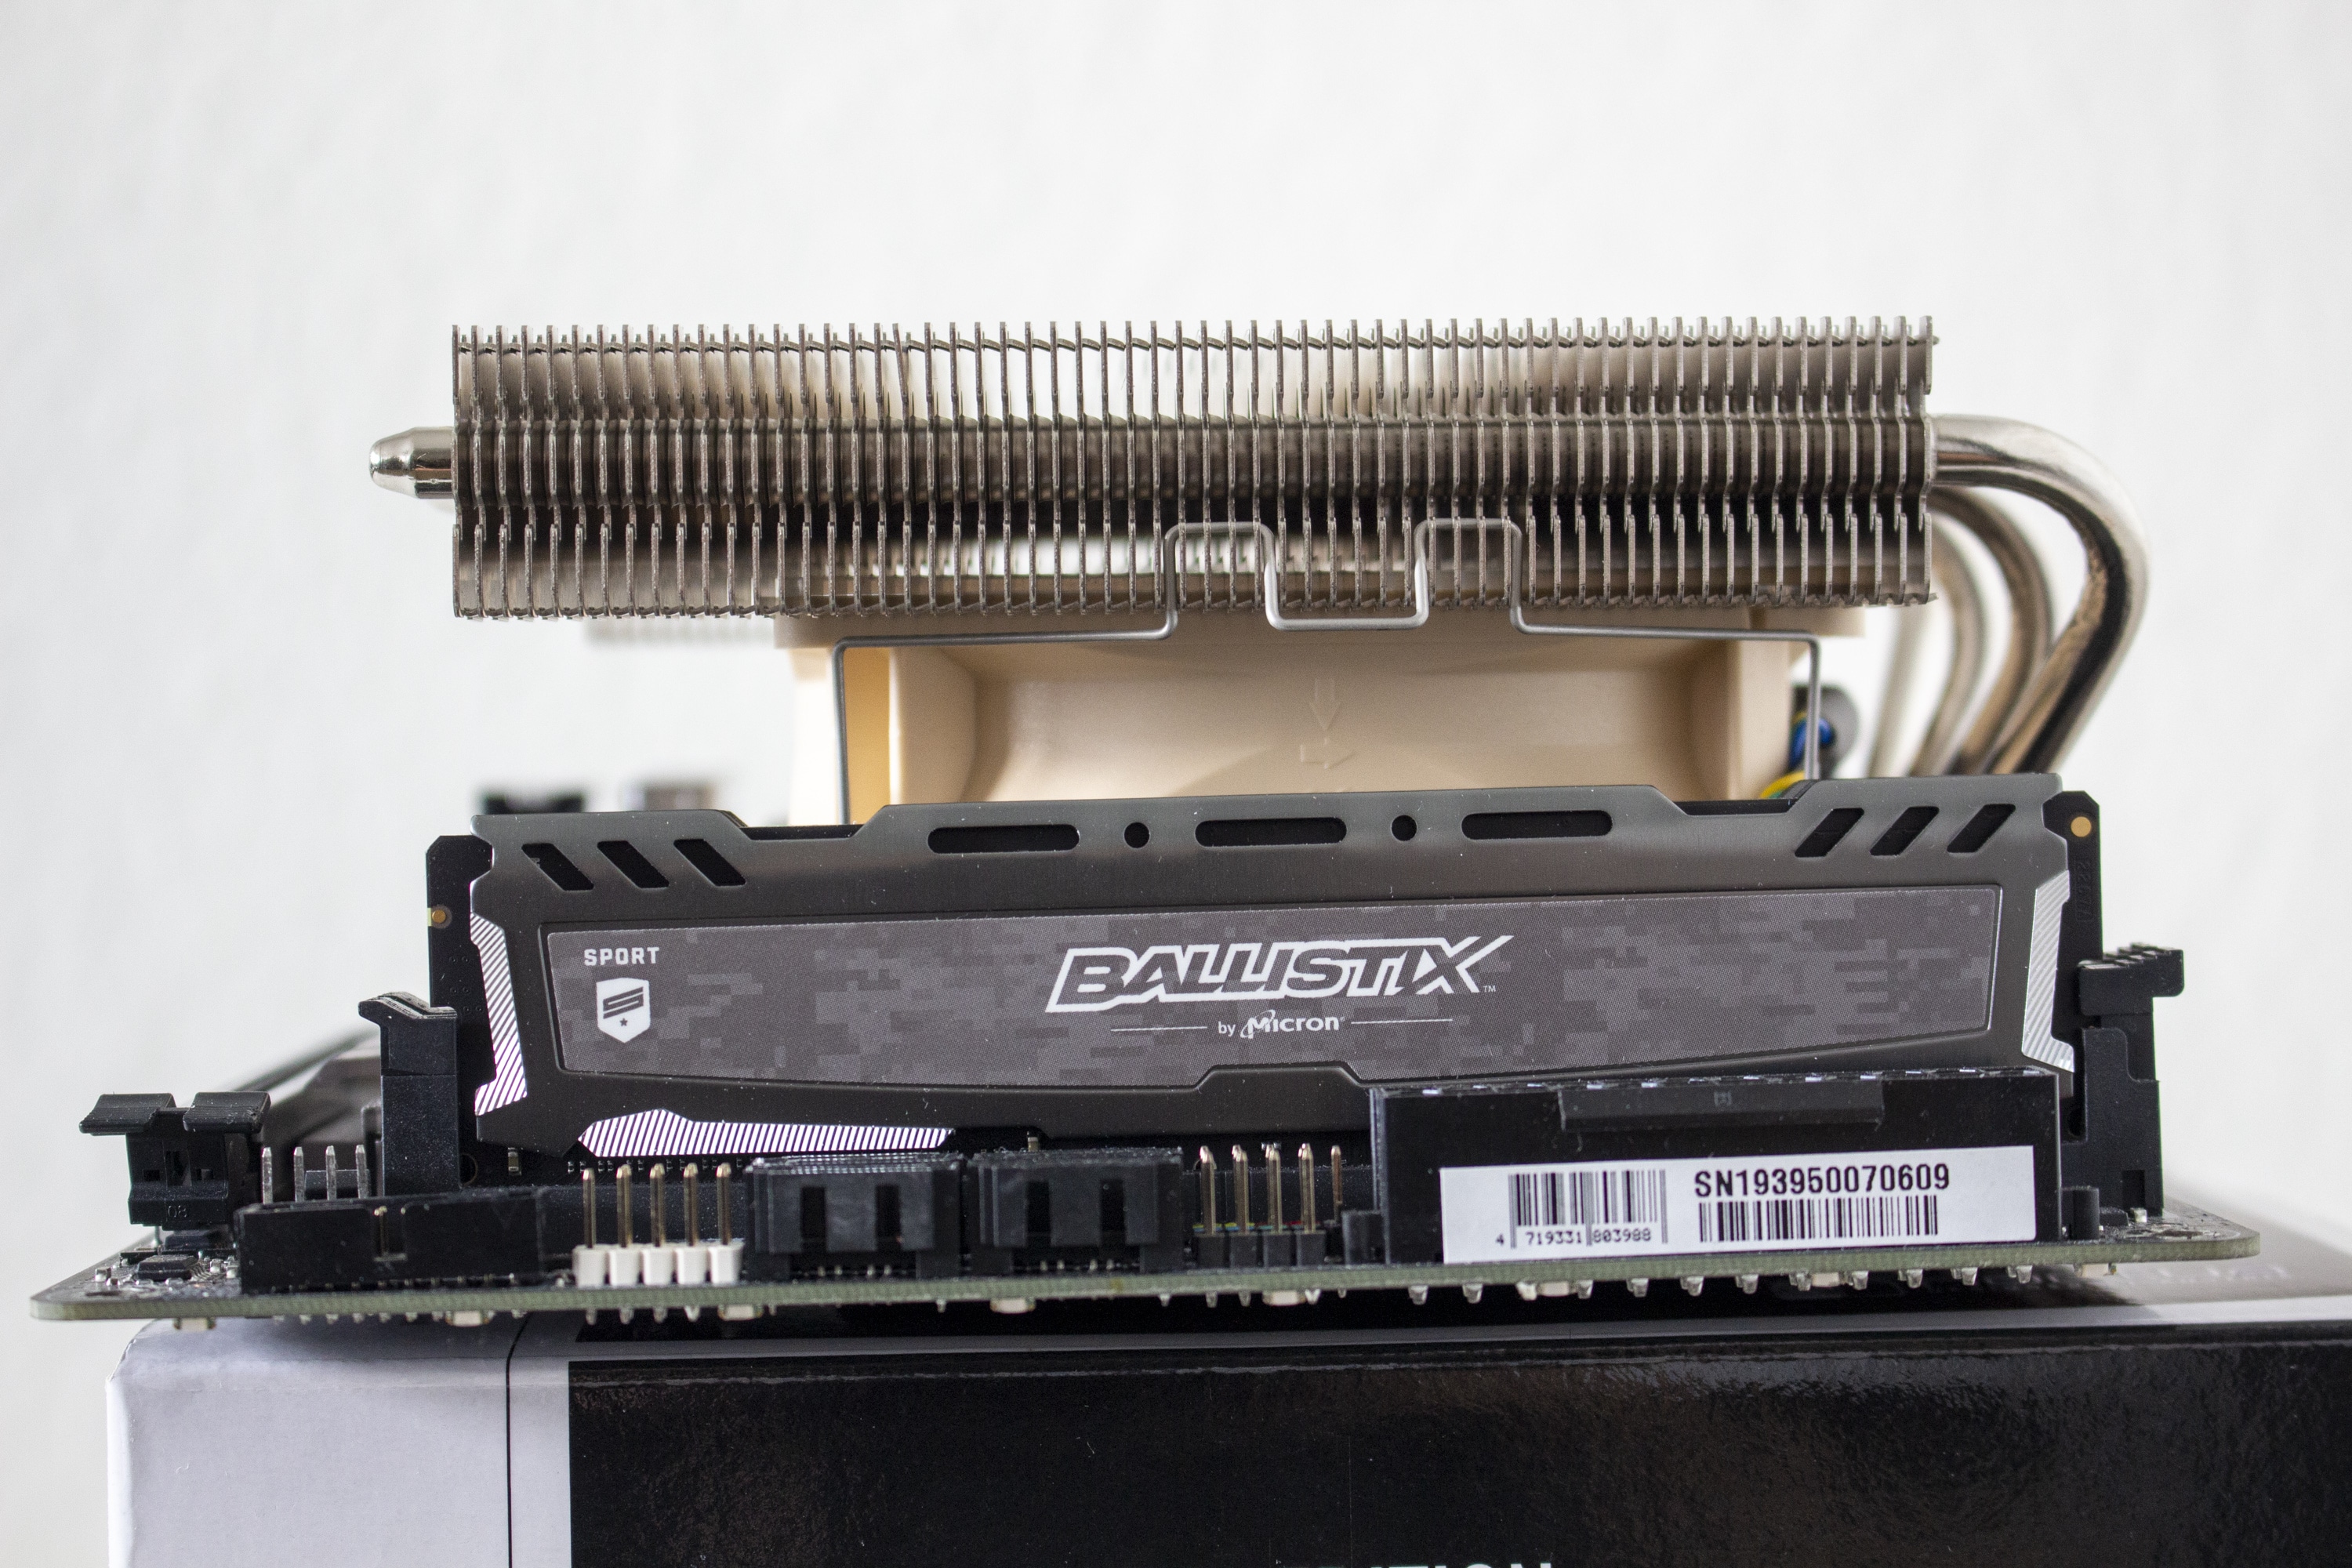 Ladrillo Gimnasta suizo Noctua NH-L12 Ghost S1 Edition - perfect CPU cooler for compact ITX systems?